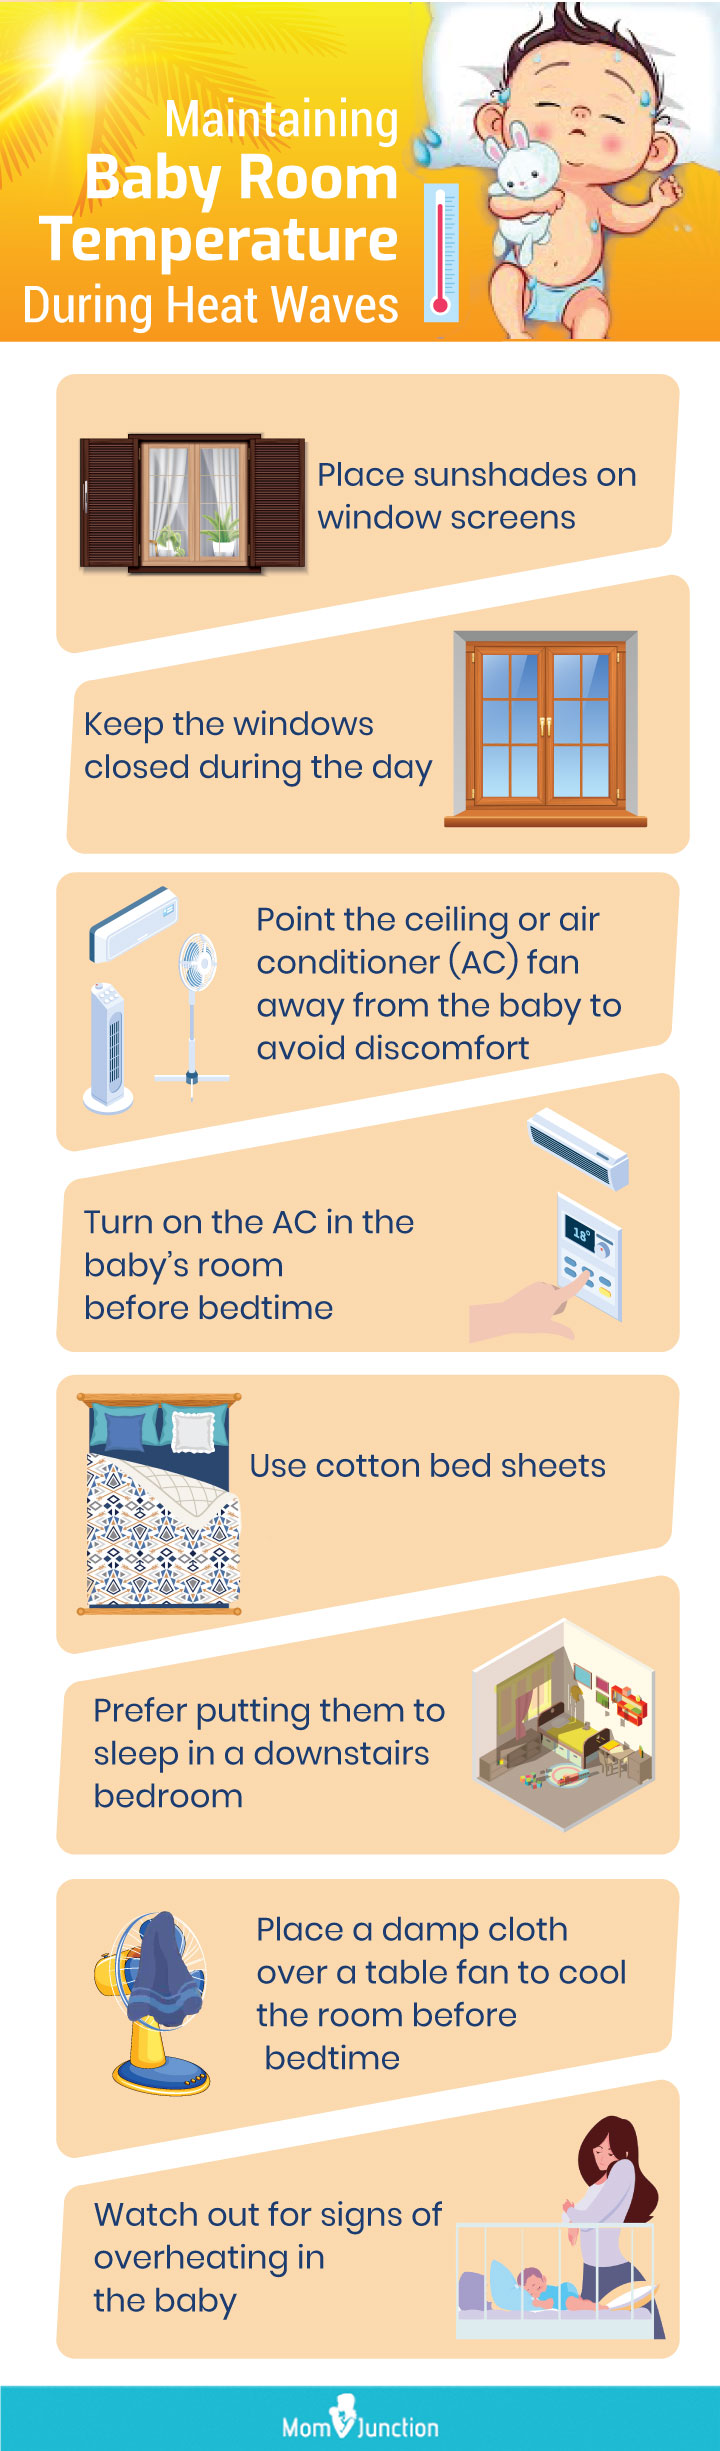 maintaining baby room temperature [infographic]